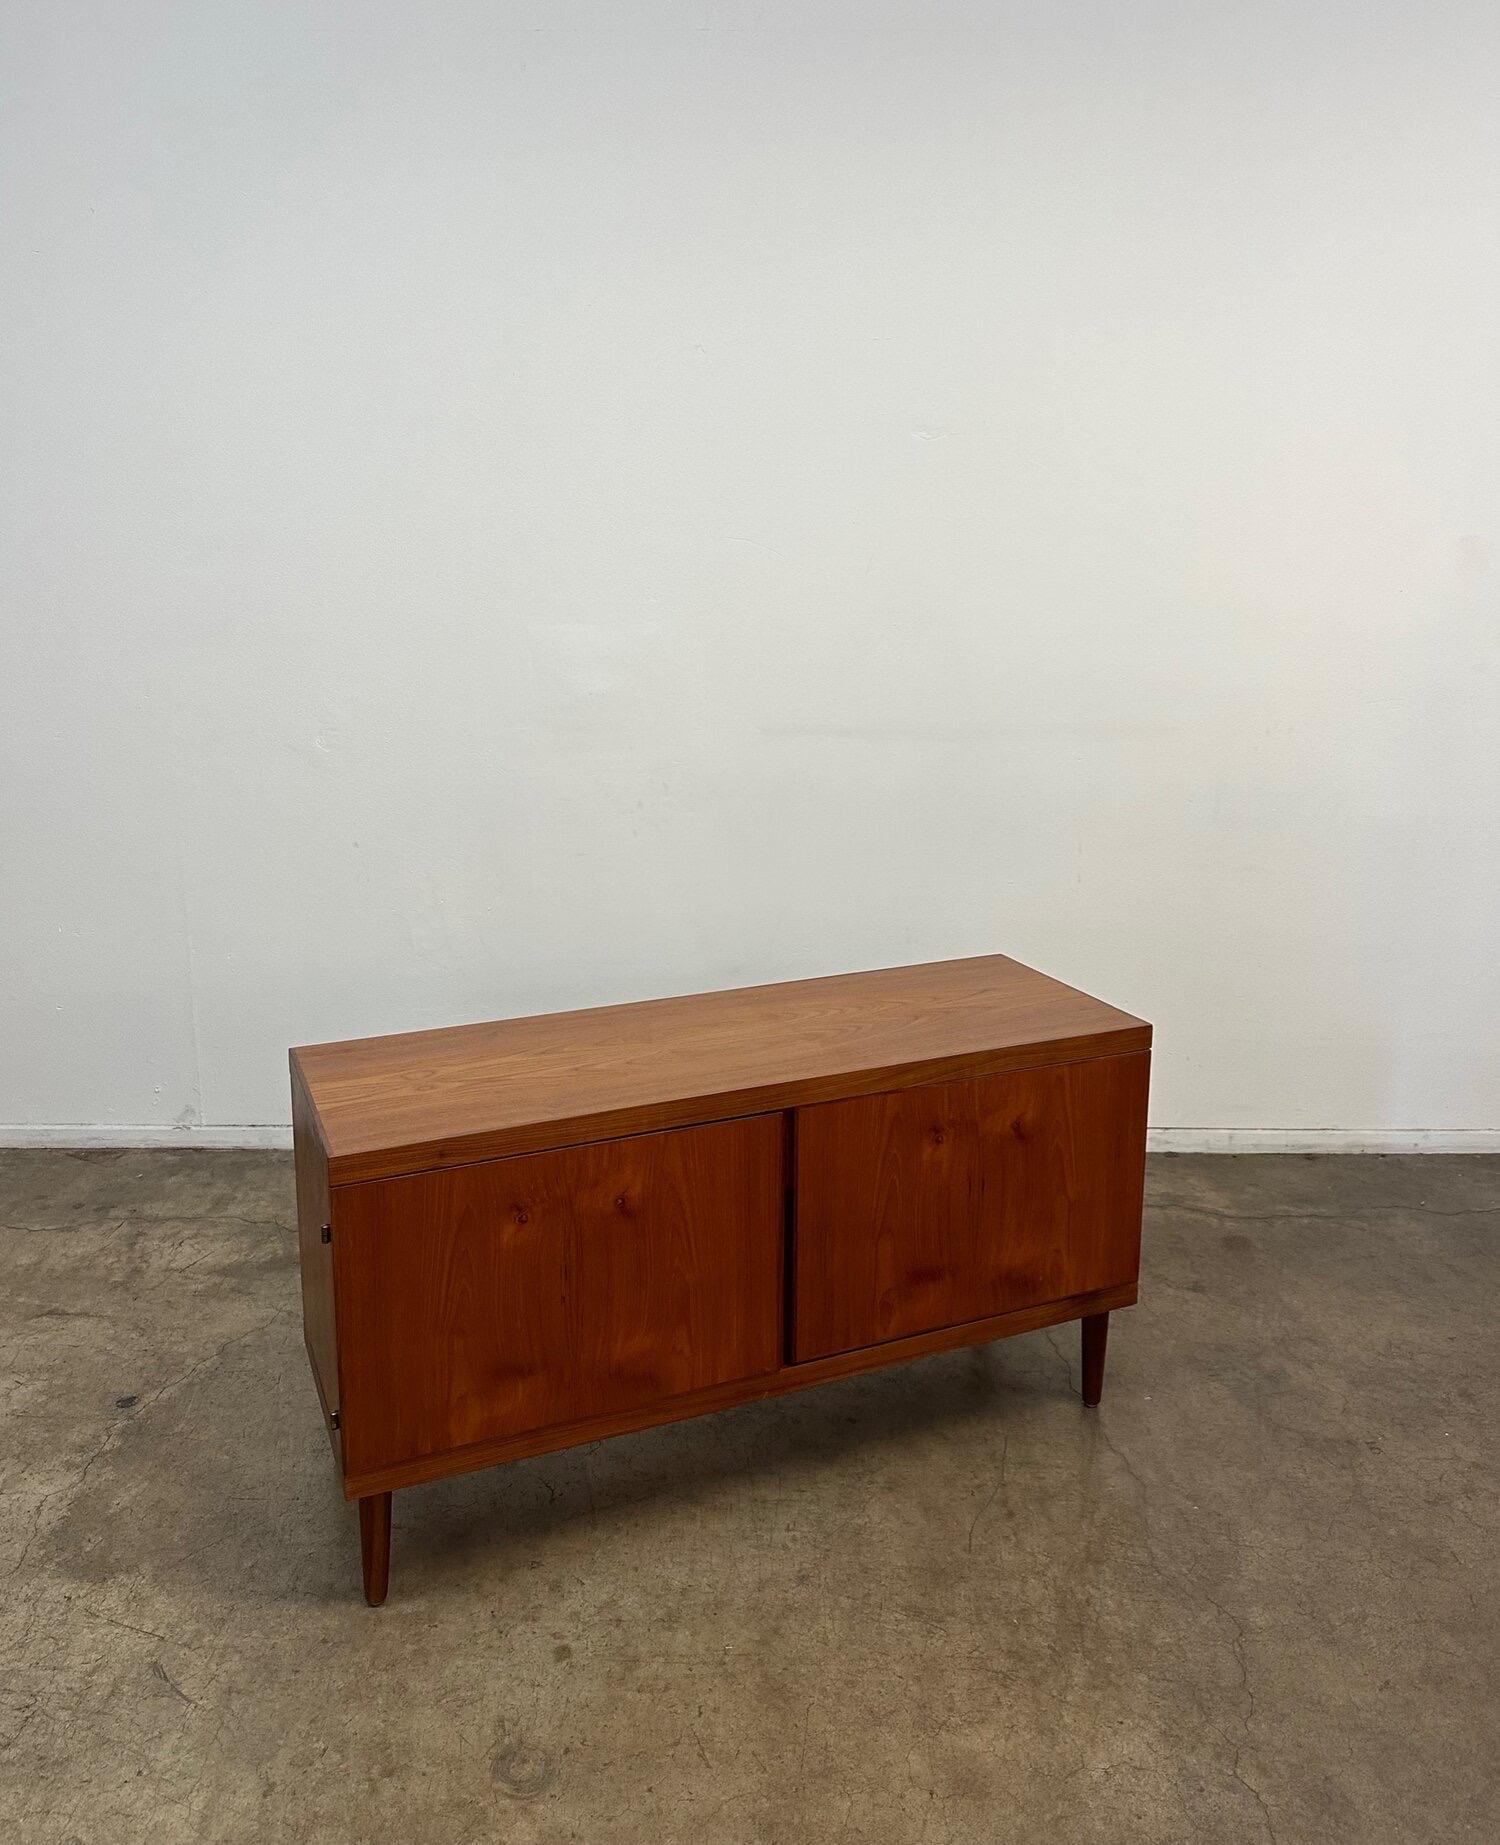 Fully restored teak credenza by Hans Olsen. Item is structurally sound and fully functional.  